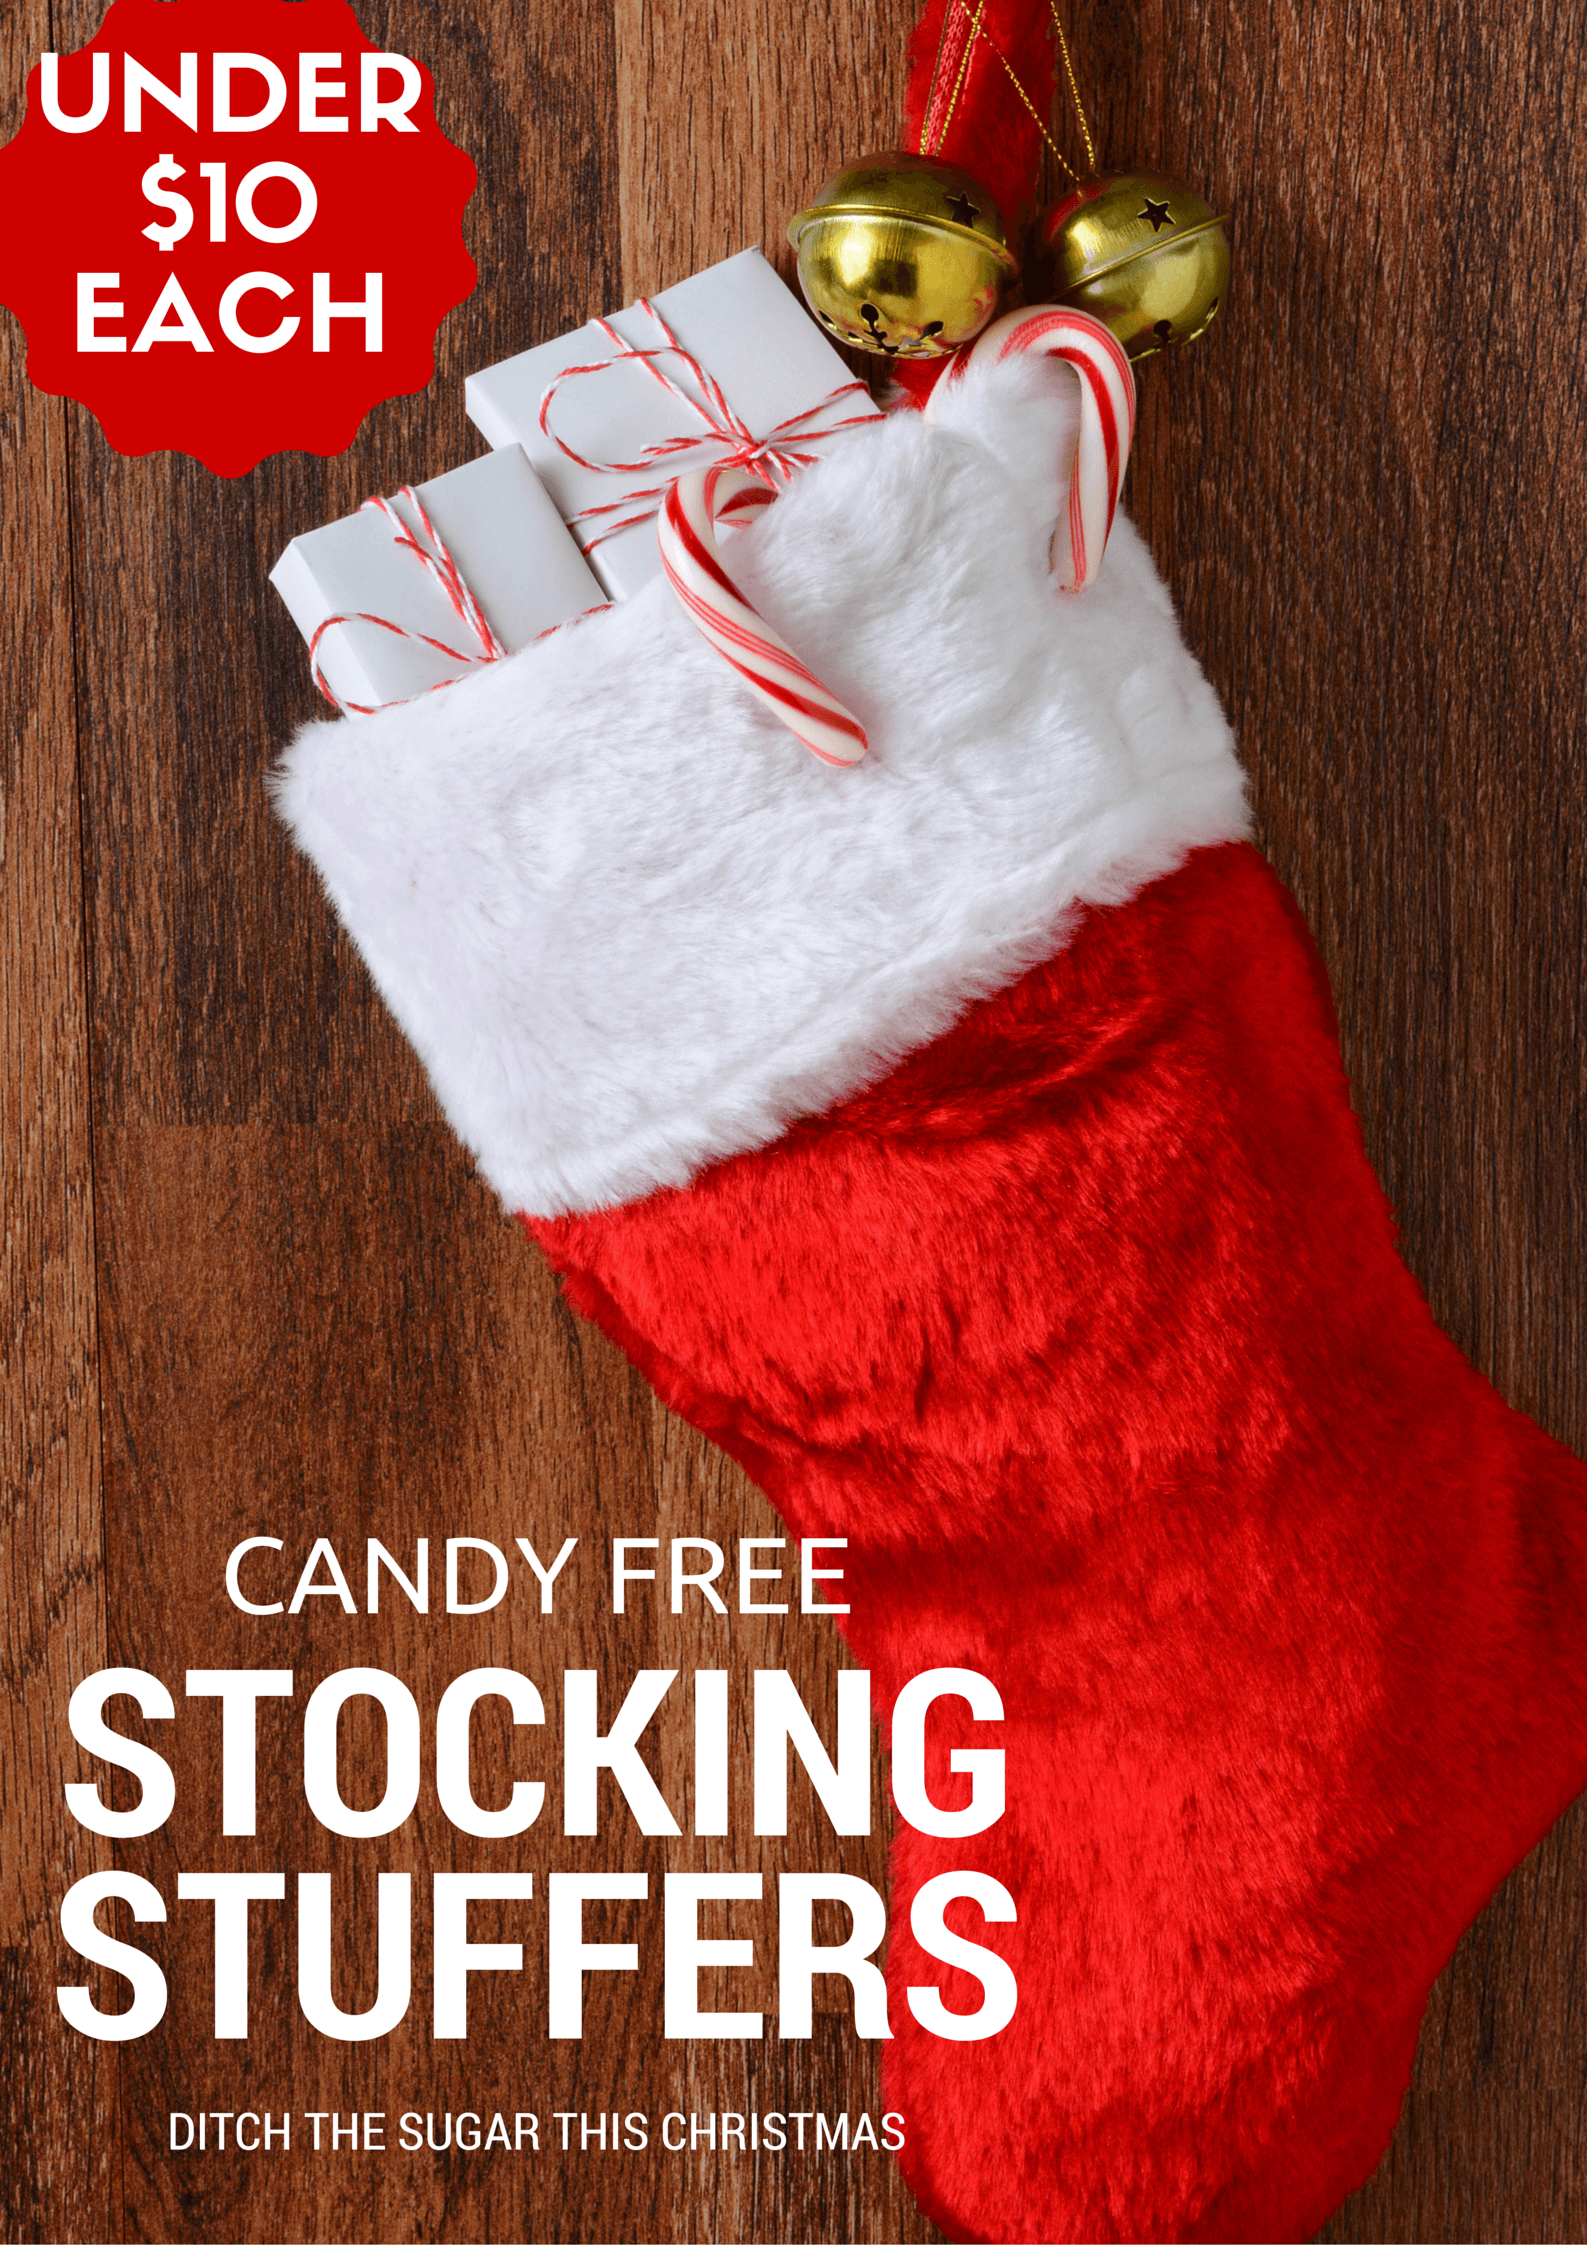 Stocking Stuffer Ideas Other Than Candy